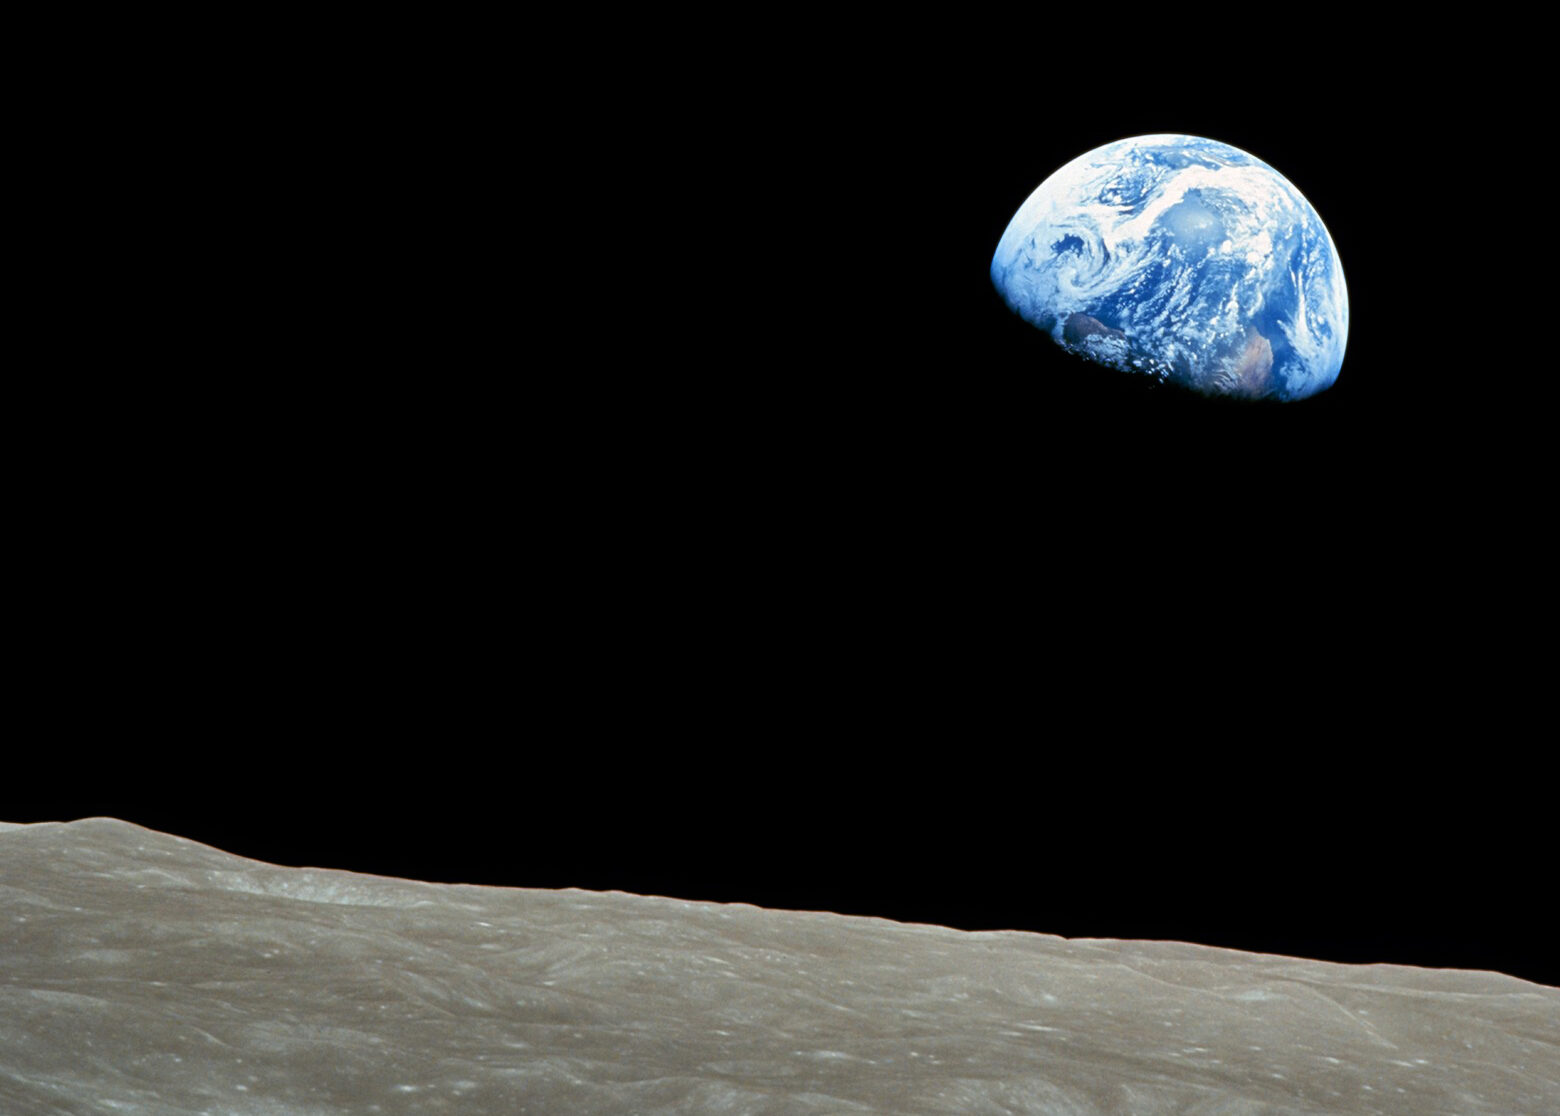 Photo of partial Earth against the blackness of space with the grey landscape of the moon in the foreground.